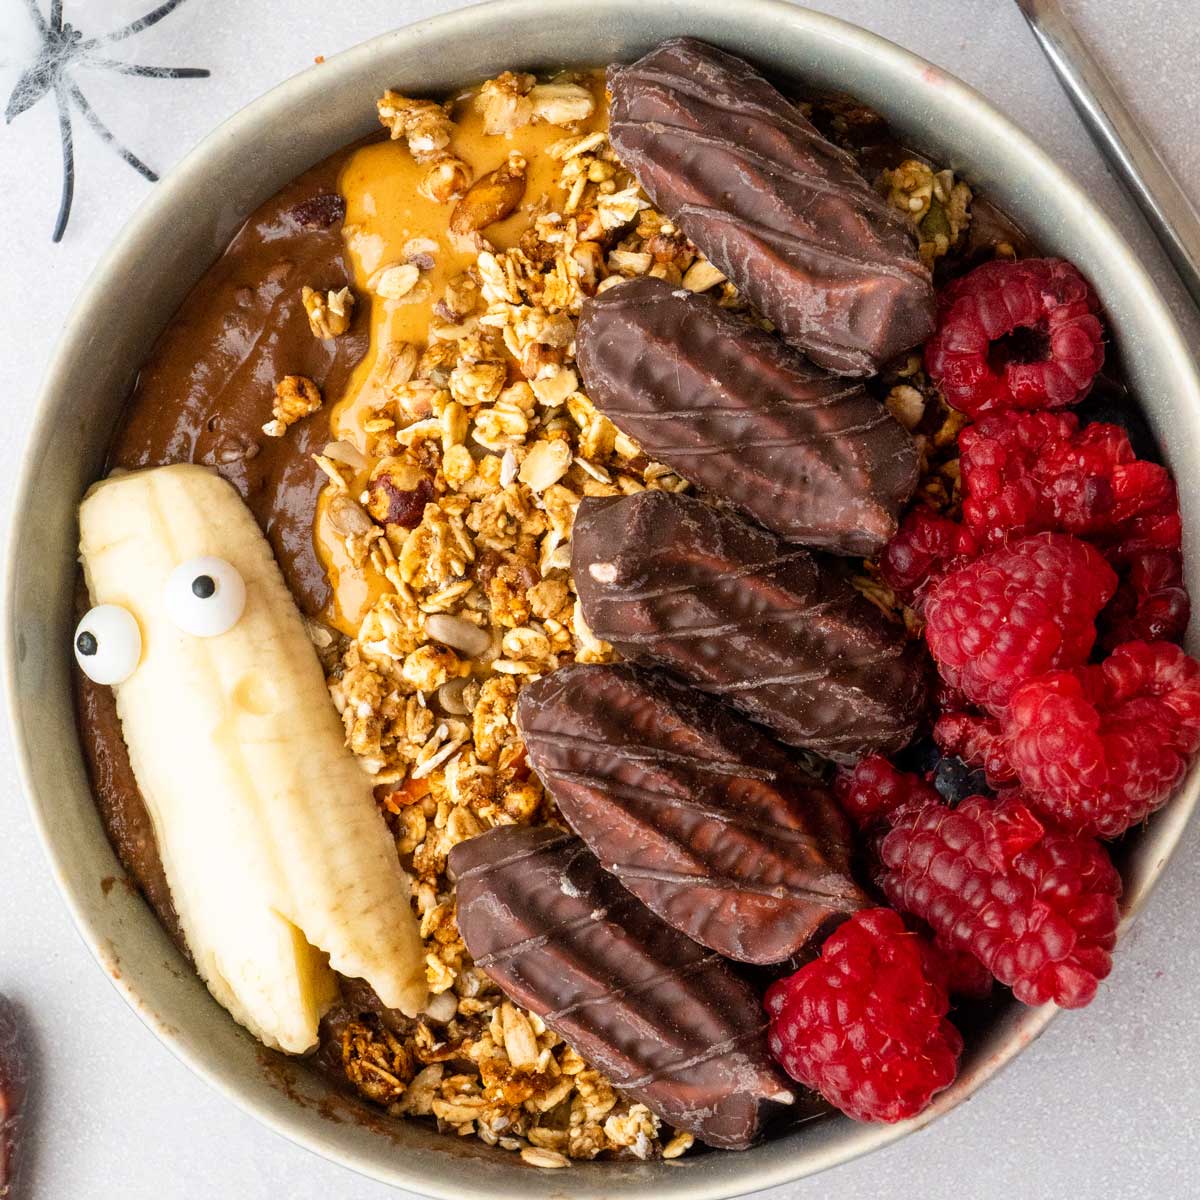 Healthy Chocolate & Peanut Butter Smoothie Bowl Recipe